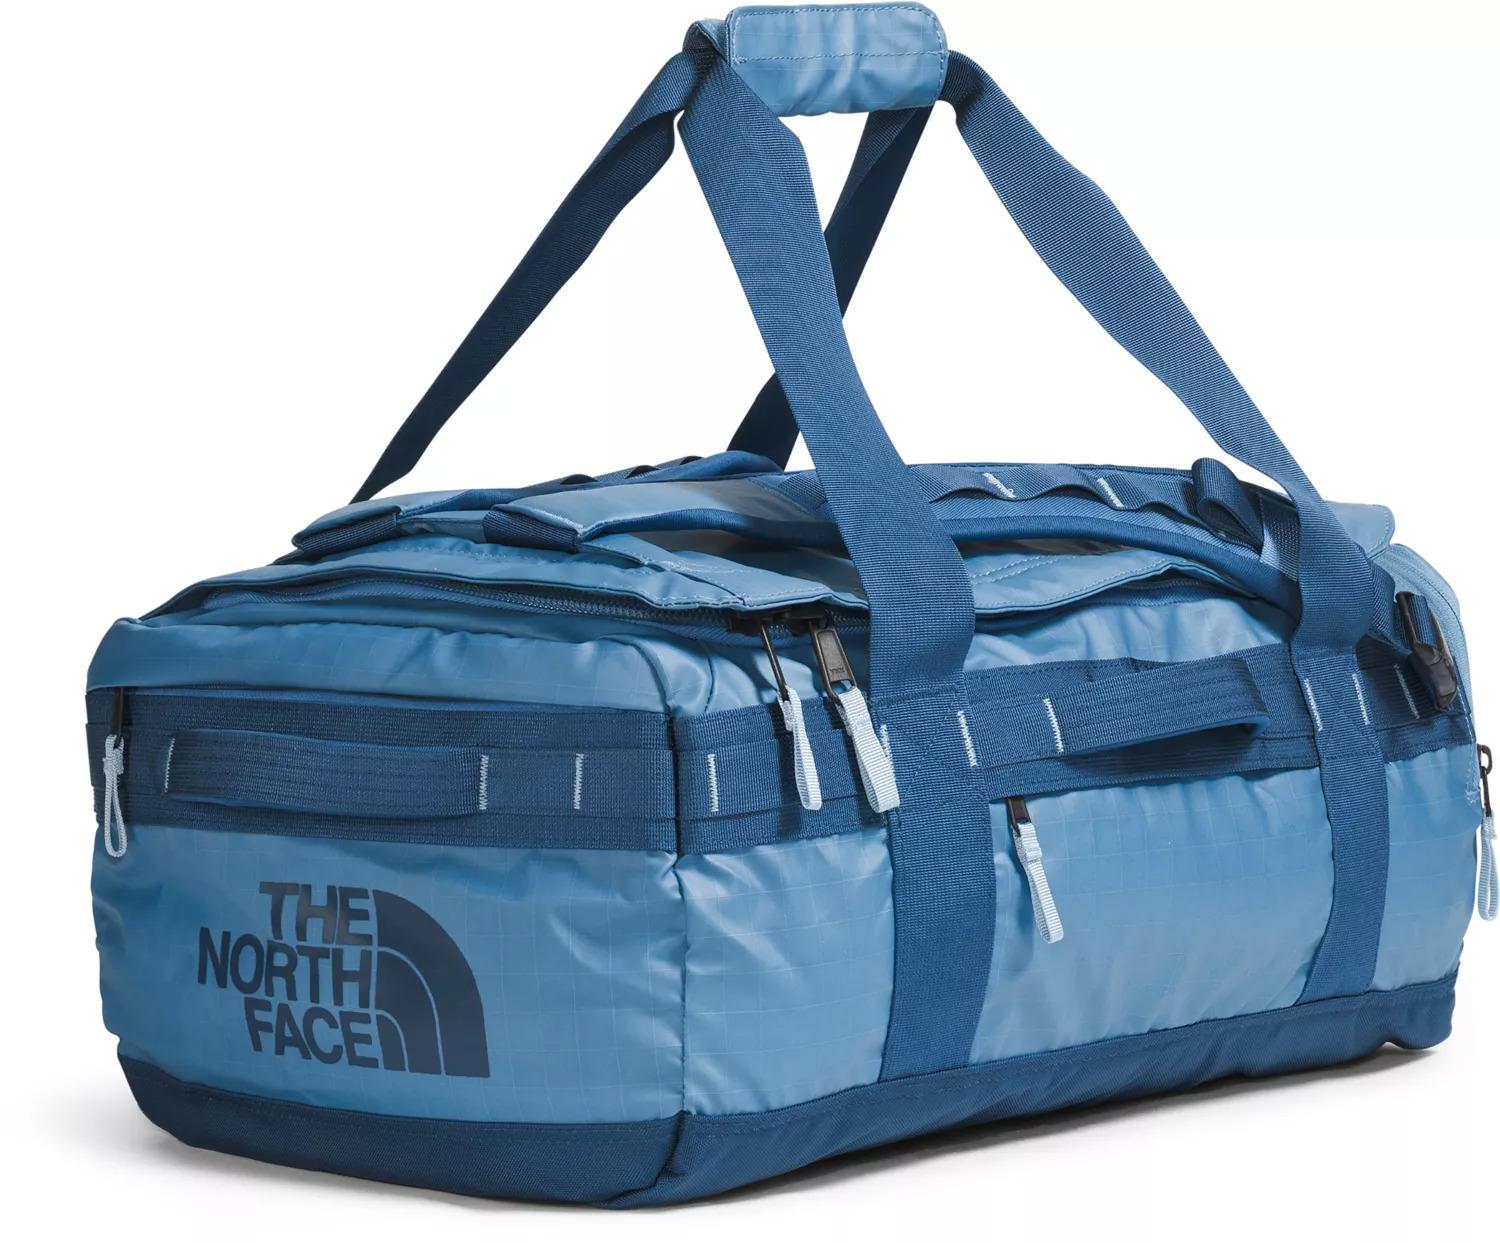 The North Face Base Camp Voyager 42L Duffel Bag for $67.50 Shipped